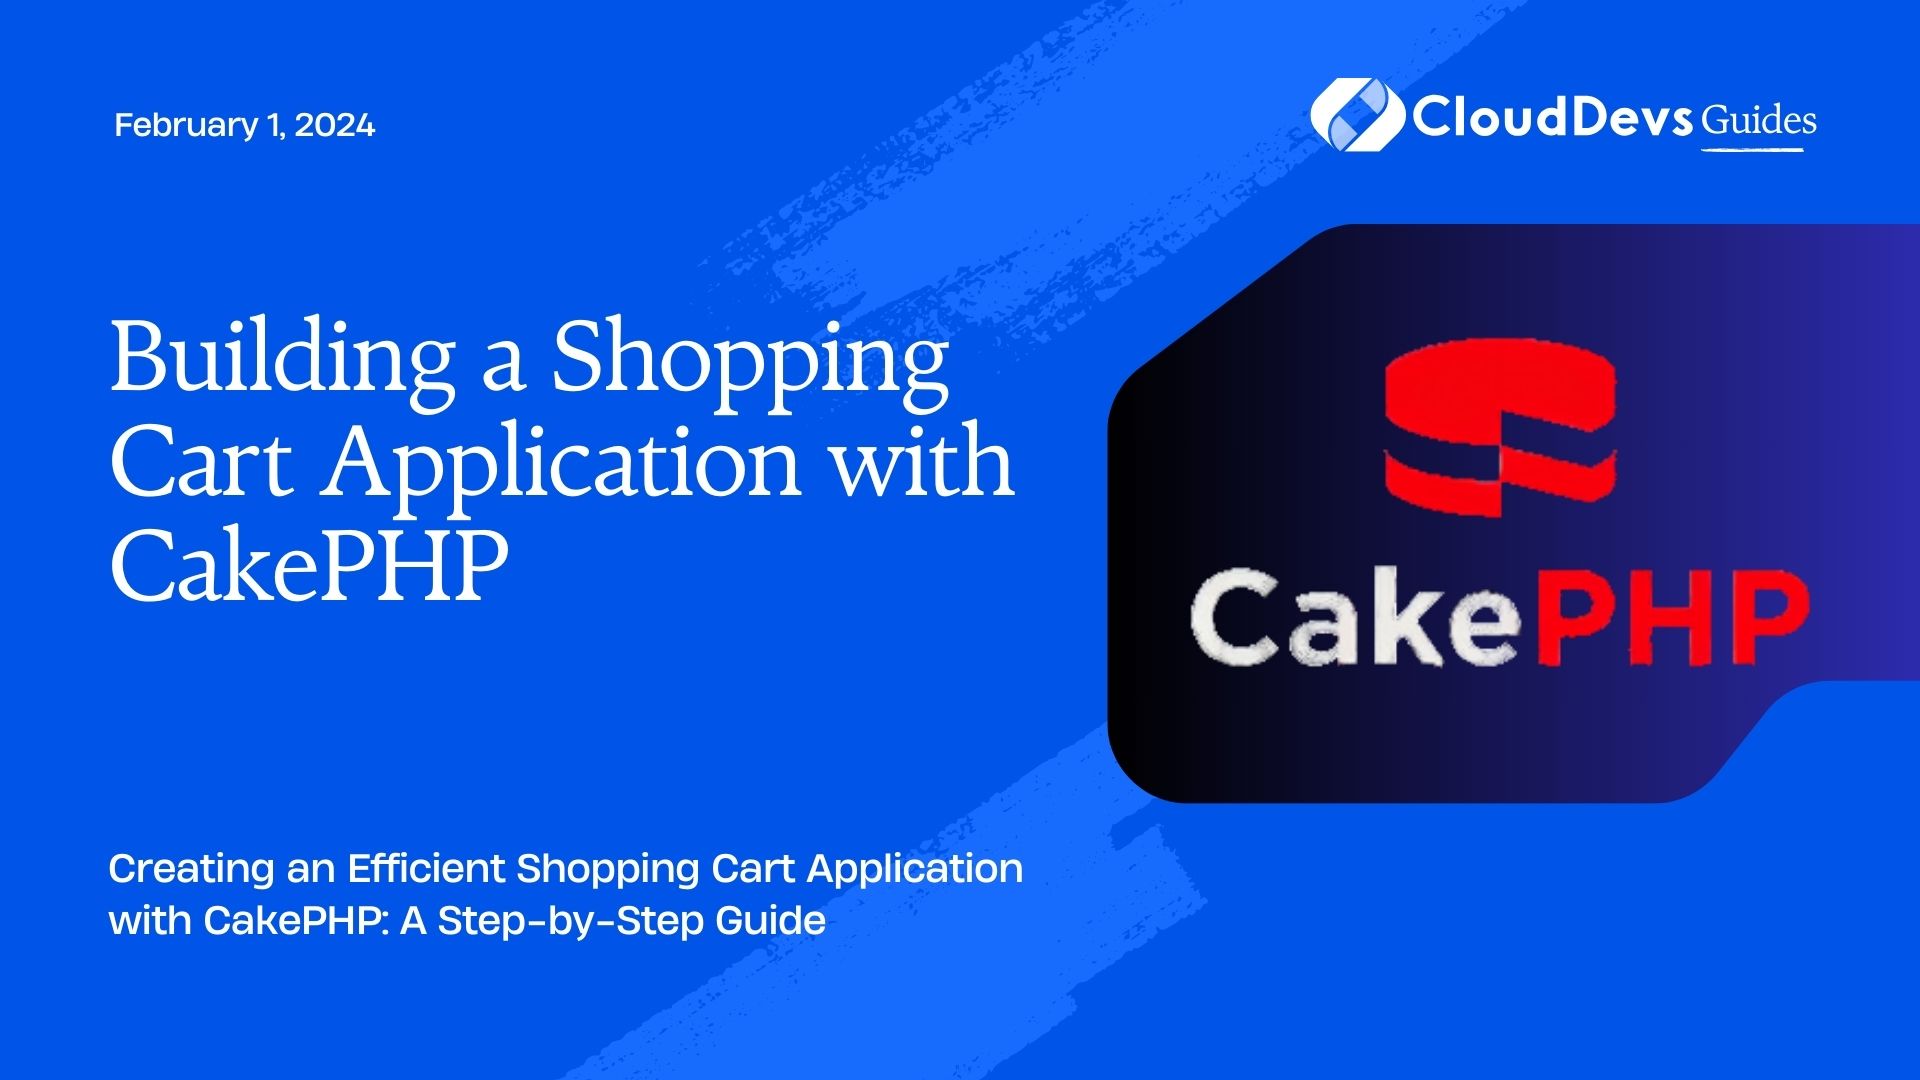 Building a Shopping Cart Application with CakePHP